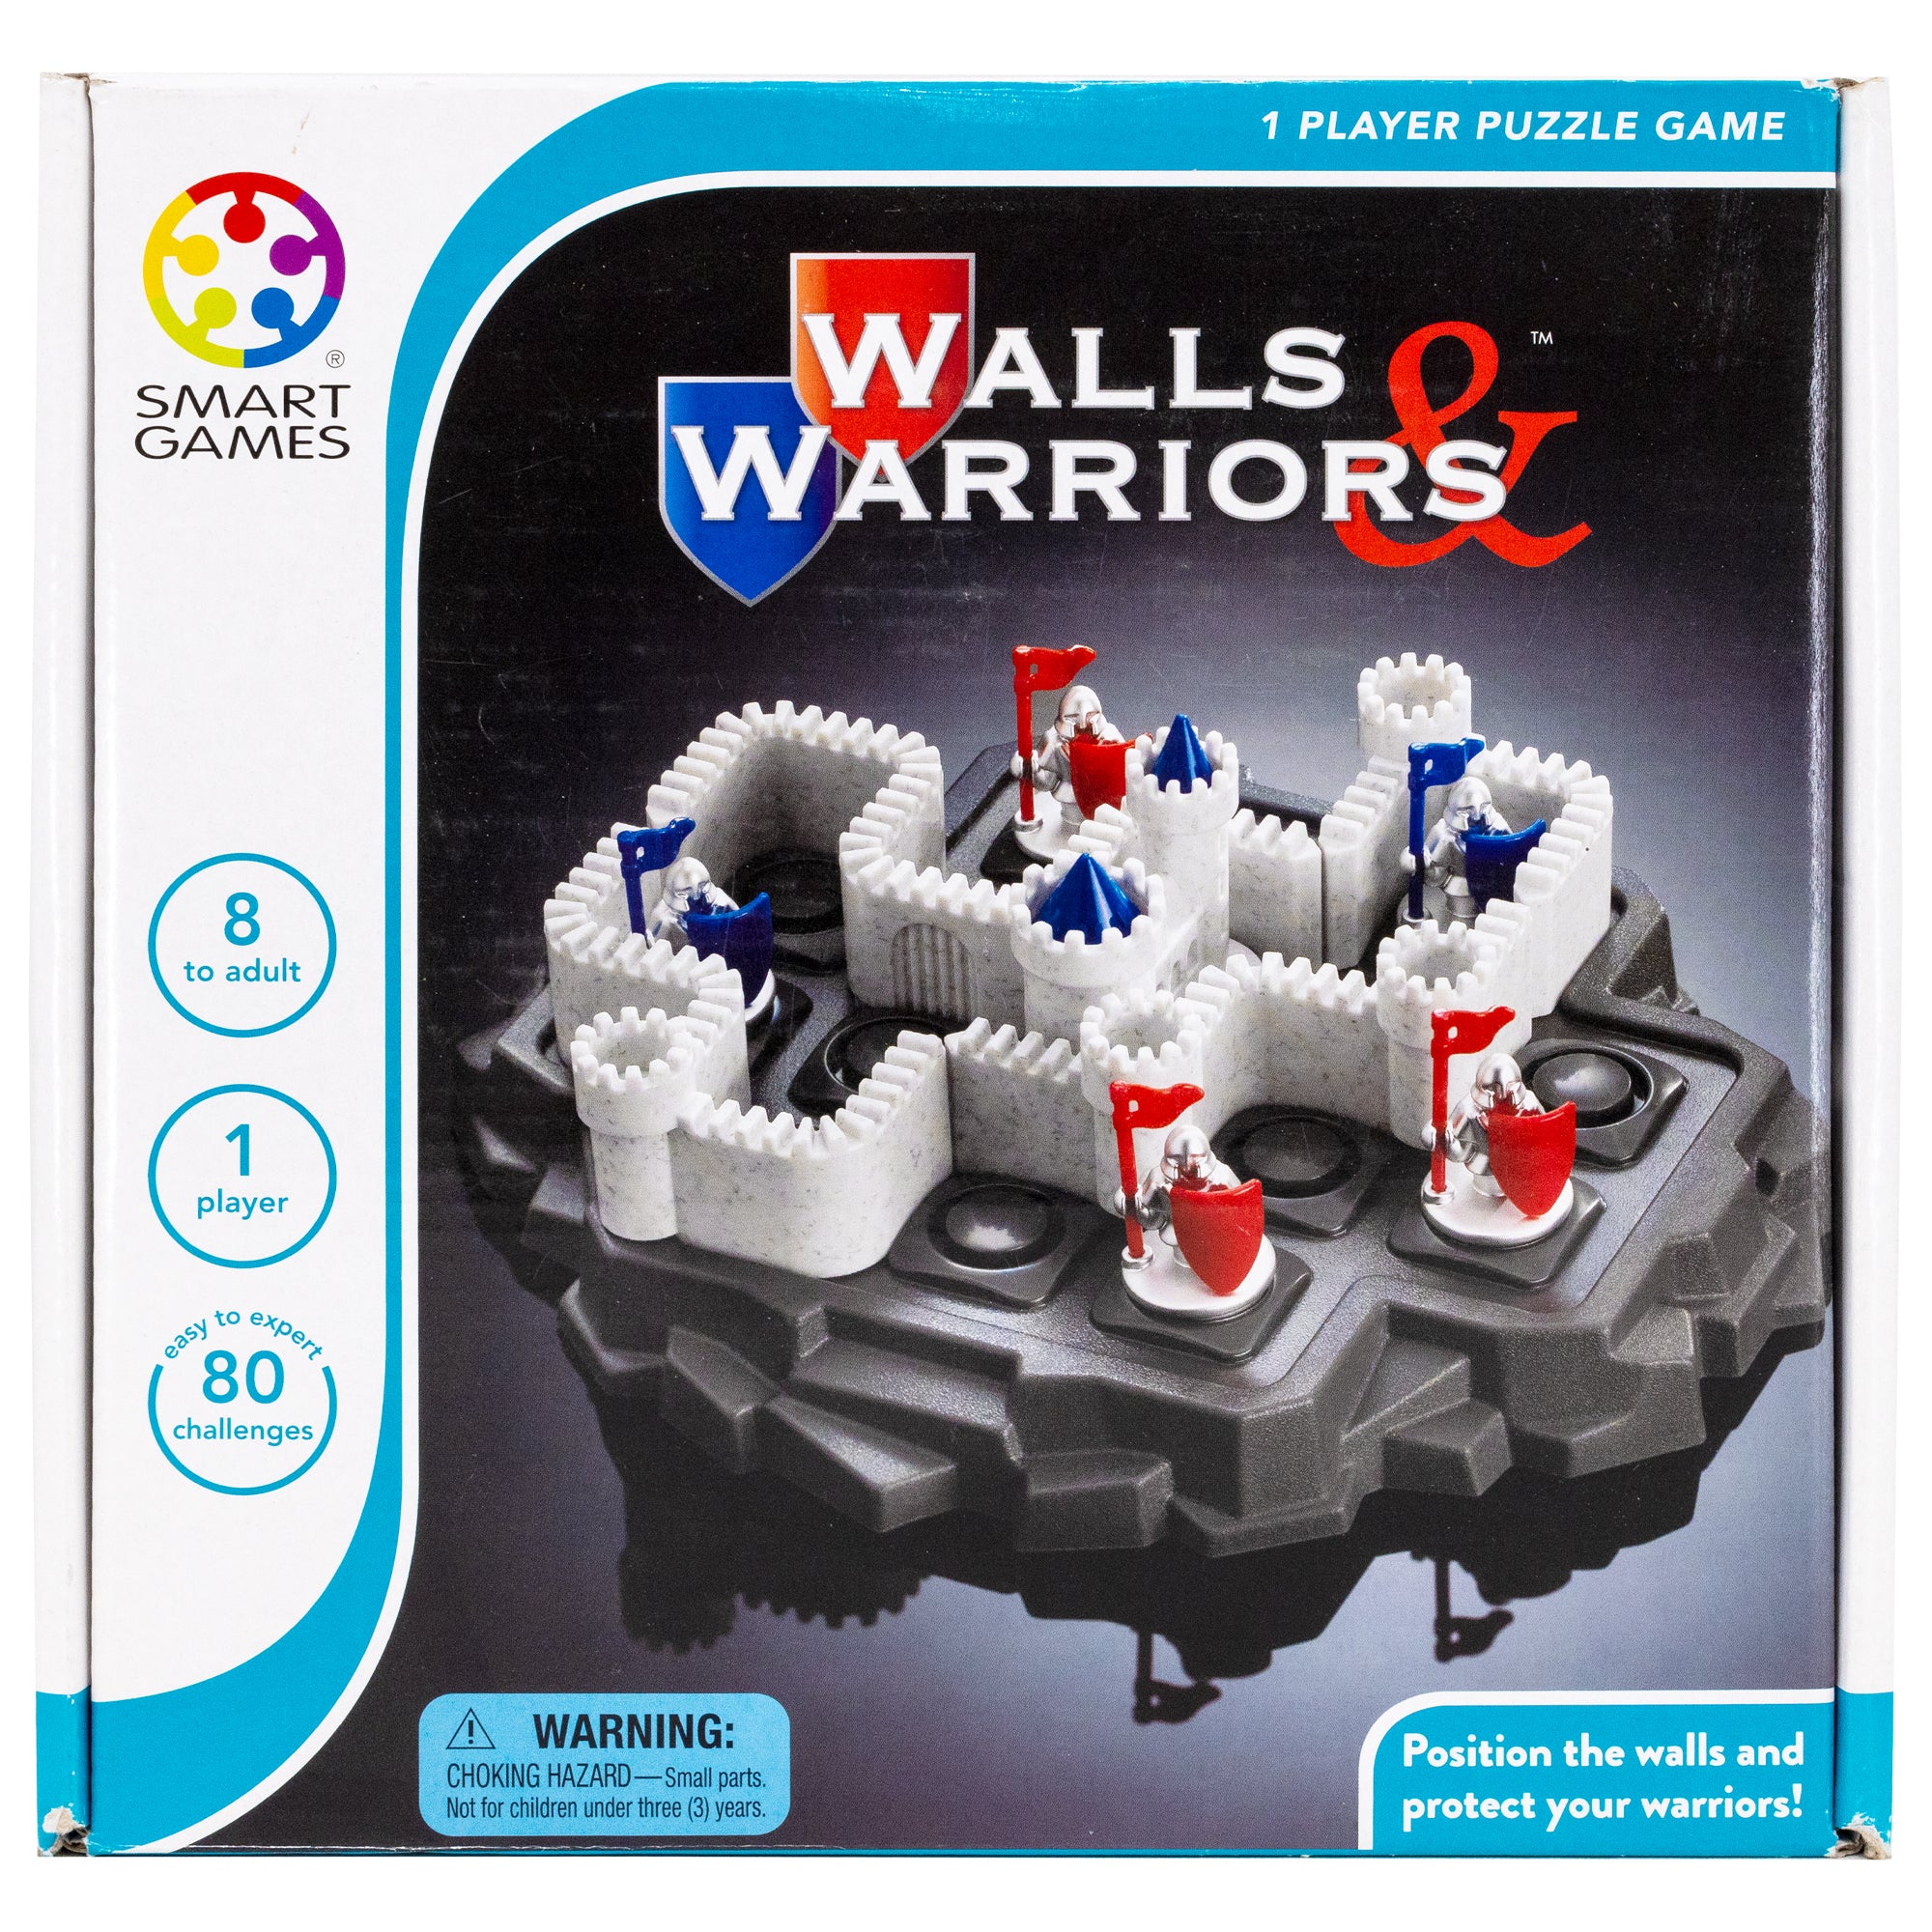 Walls & Warriors game box showing the game in play on the cover. The game base looks like a gray rock island with circles cut into squares on the top, allowing game pieces to be put in place. There are castle wall pieces and silver knight pieces with red and blue flags and shields. There are 4 castle wall pieces, 2 blue knights, and 3 red knight pieces on the board. The box indicated that it is a 1 player game for ages 8 and up. Text in the bottom-right reads “position the walls and protect your warriors.”